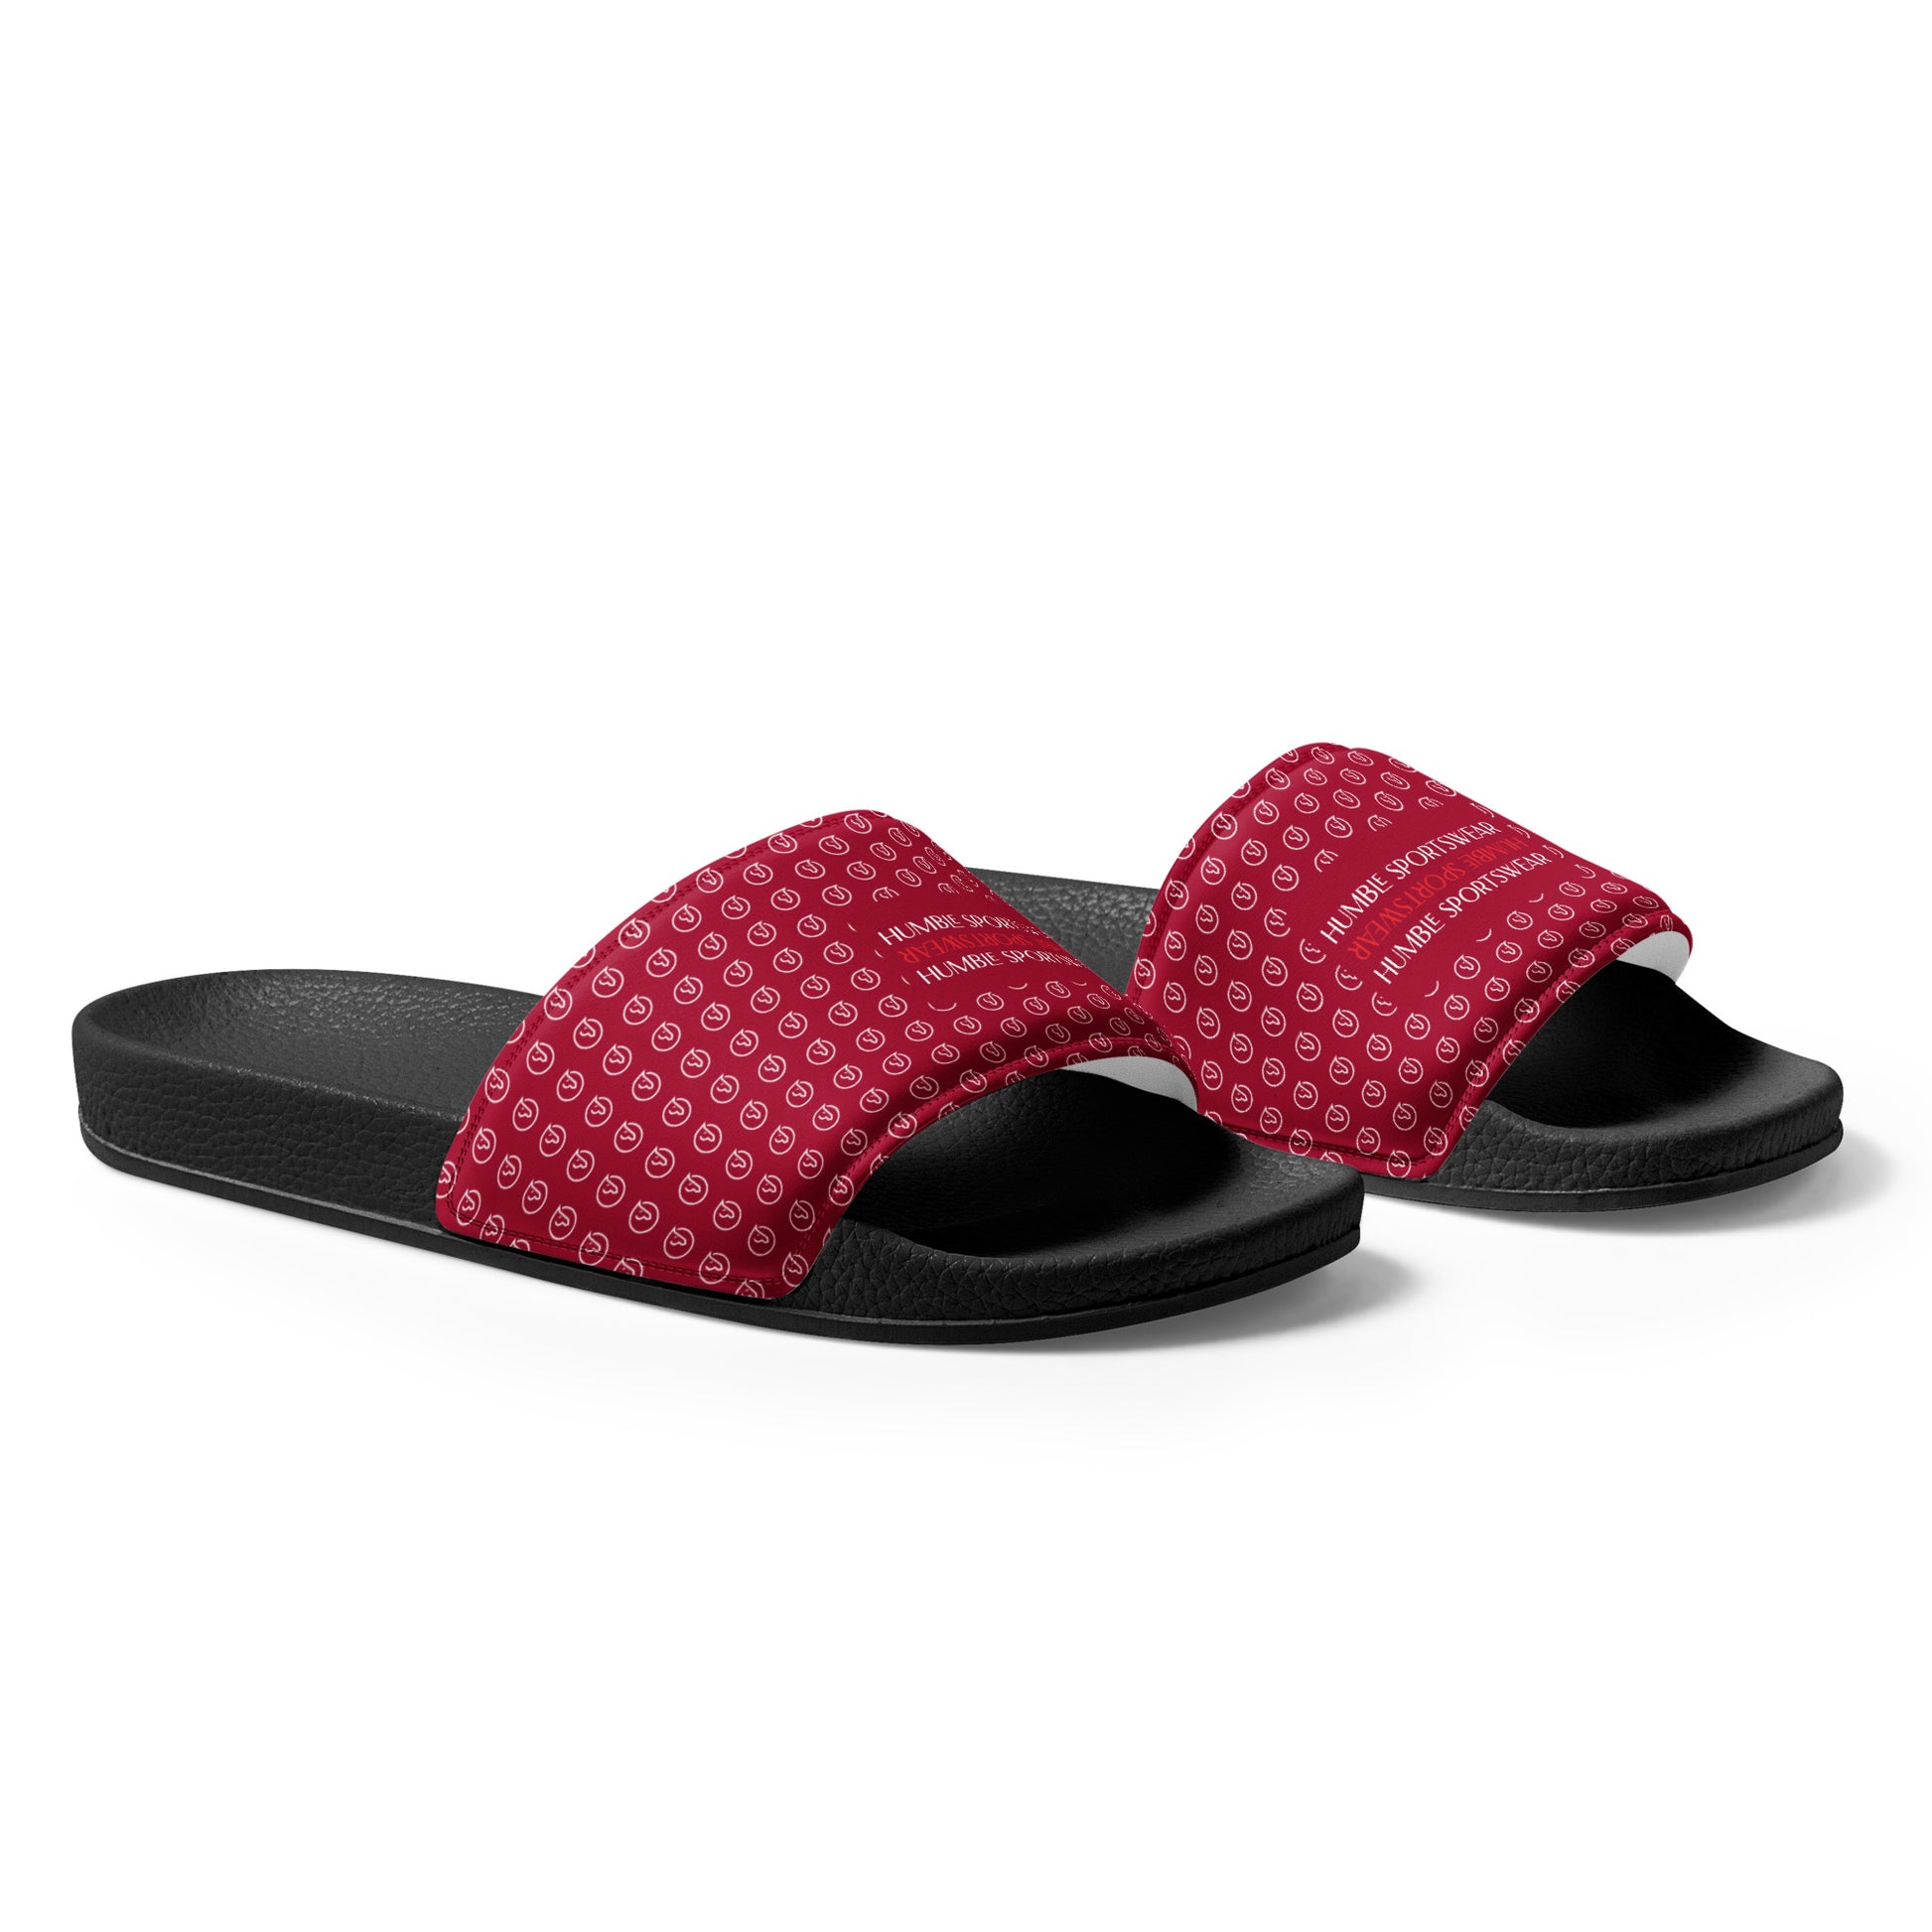 Humble Sportswear, women's casual daily wear slip on slides sandals red